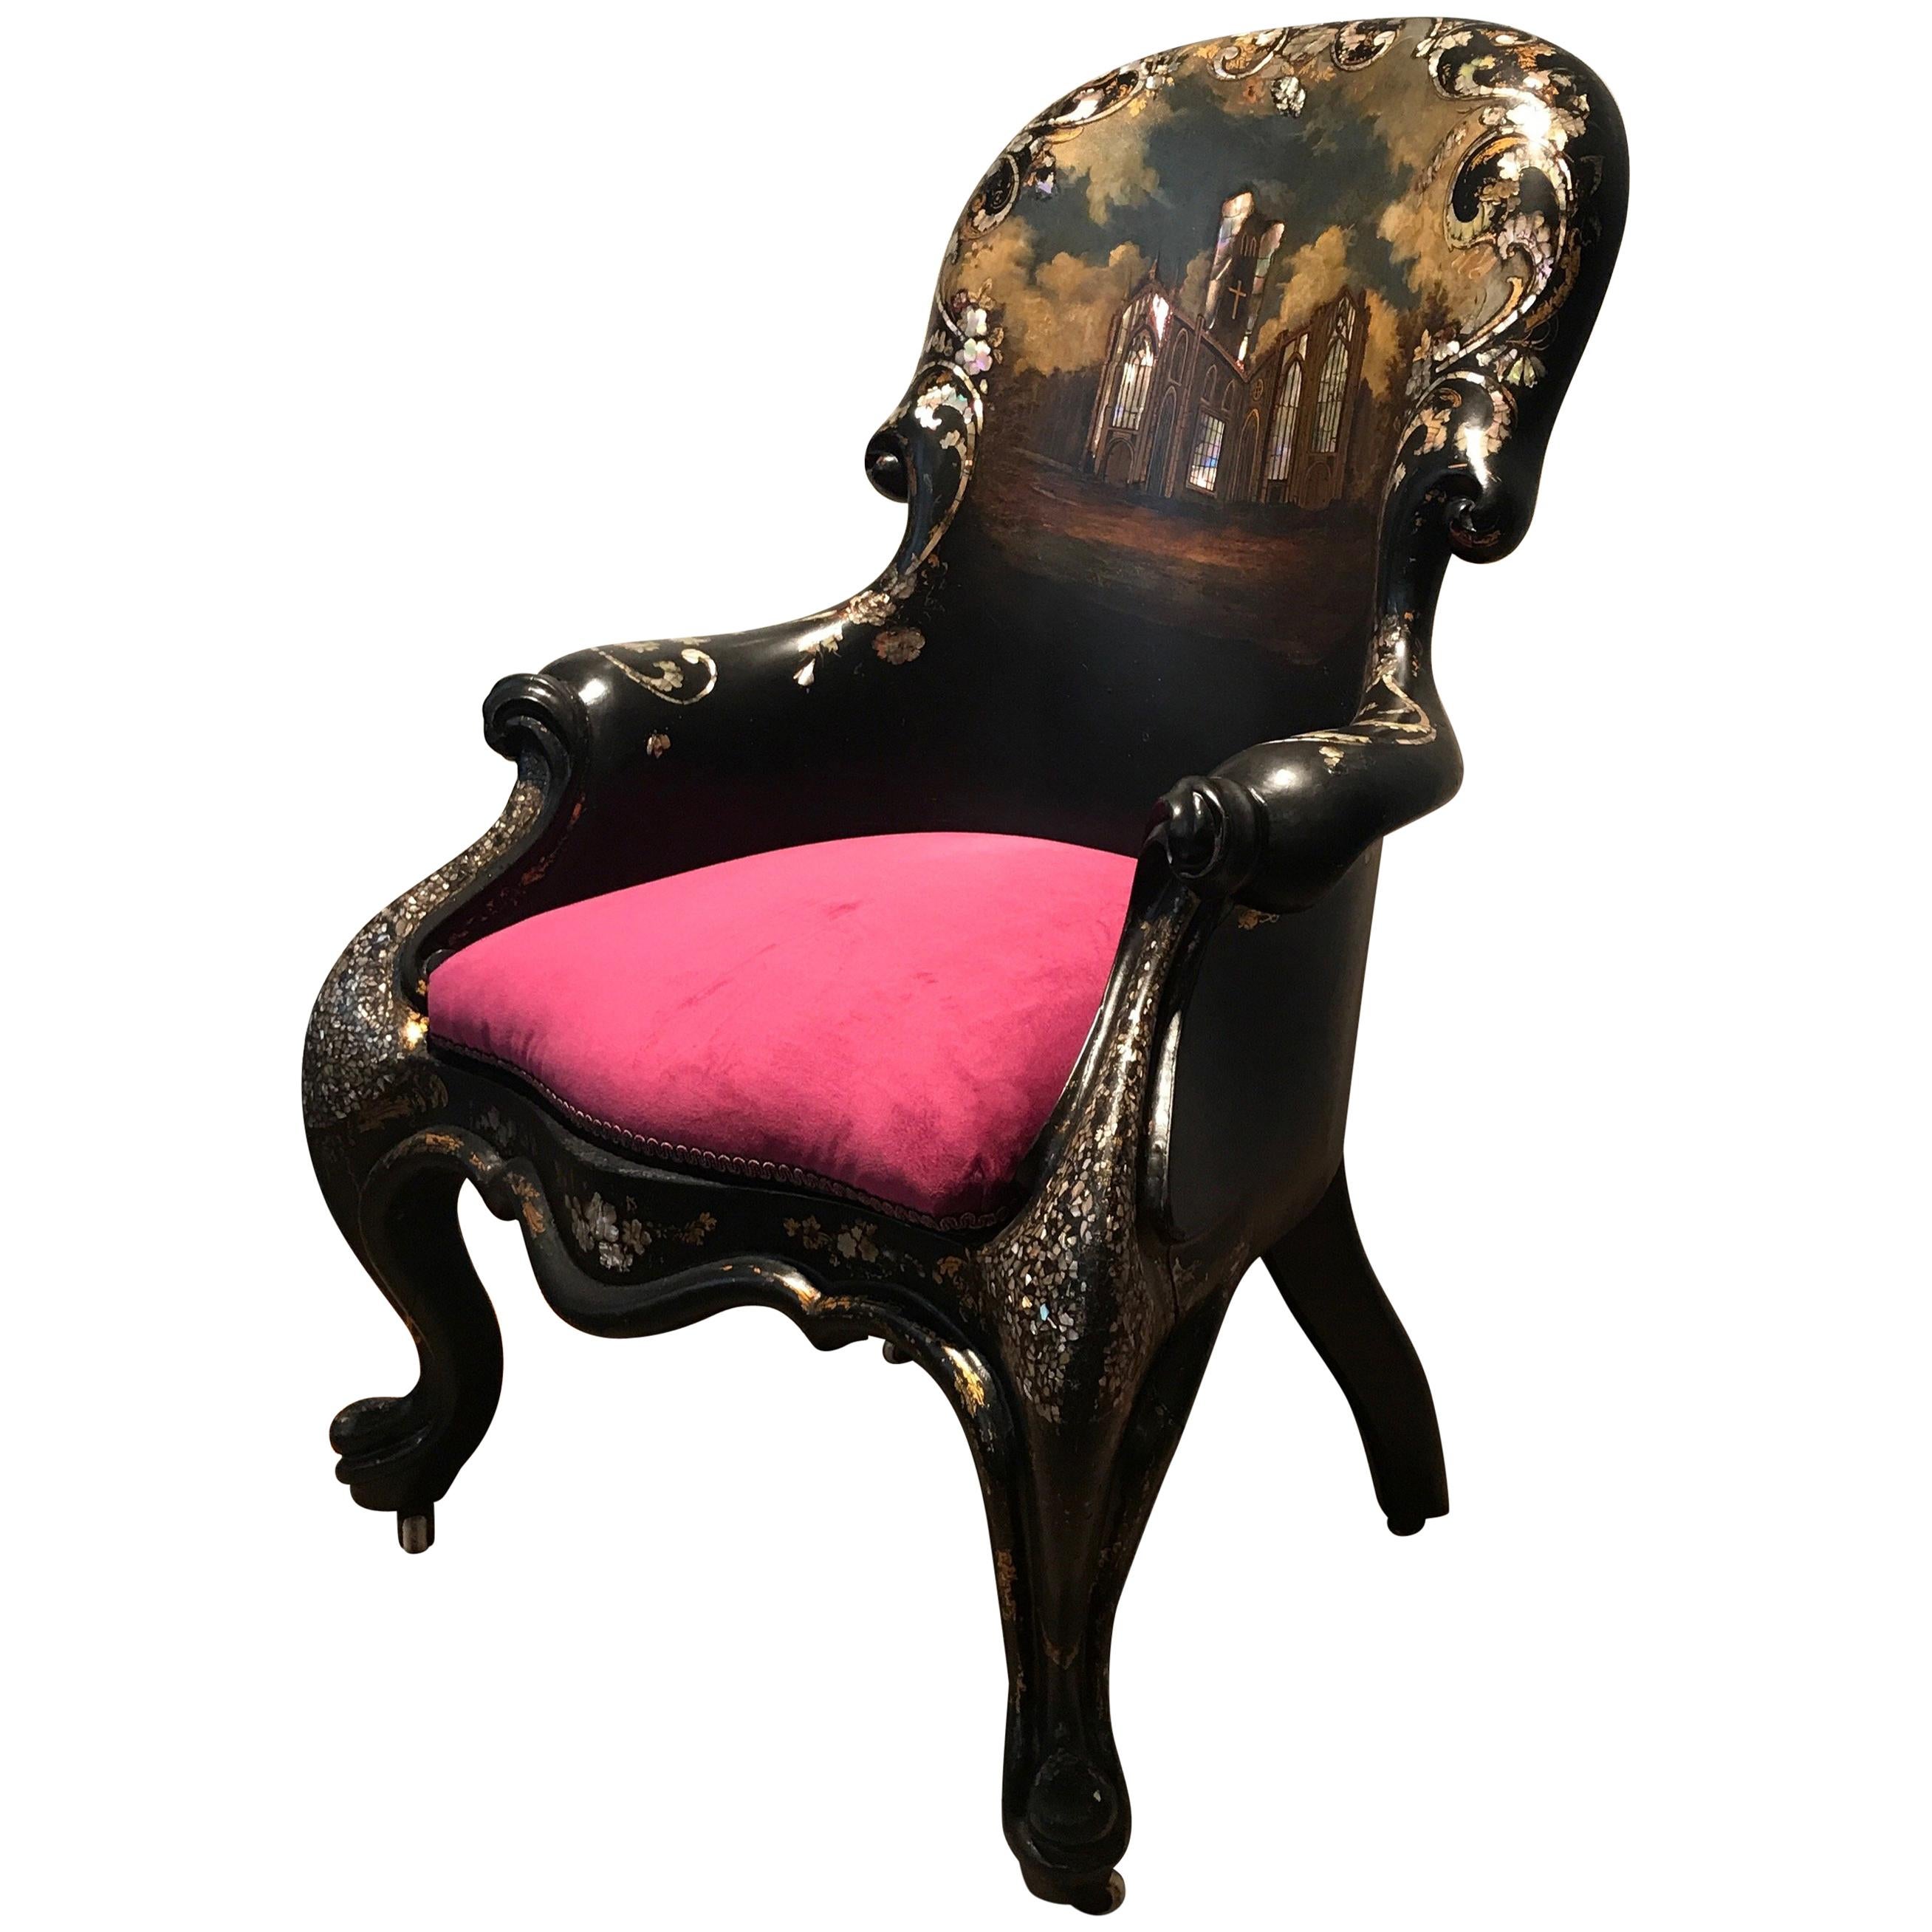 19th Century English Papier Mâché Mother-of-Pearl Inlaid Chair For Sale